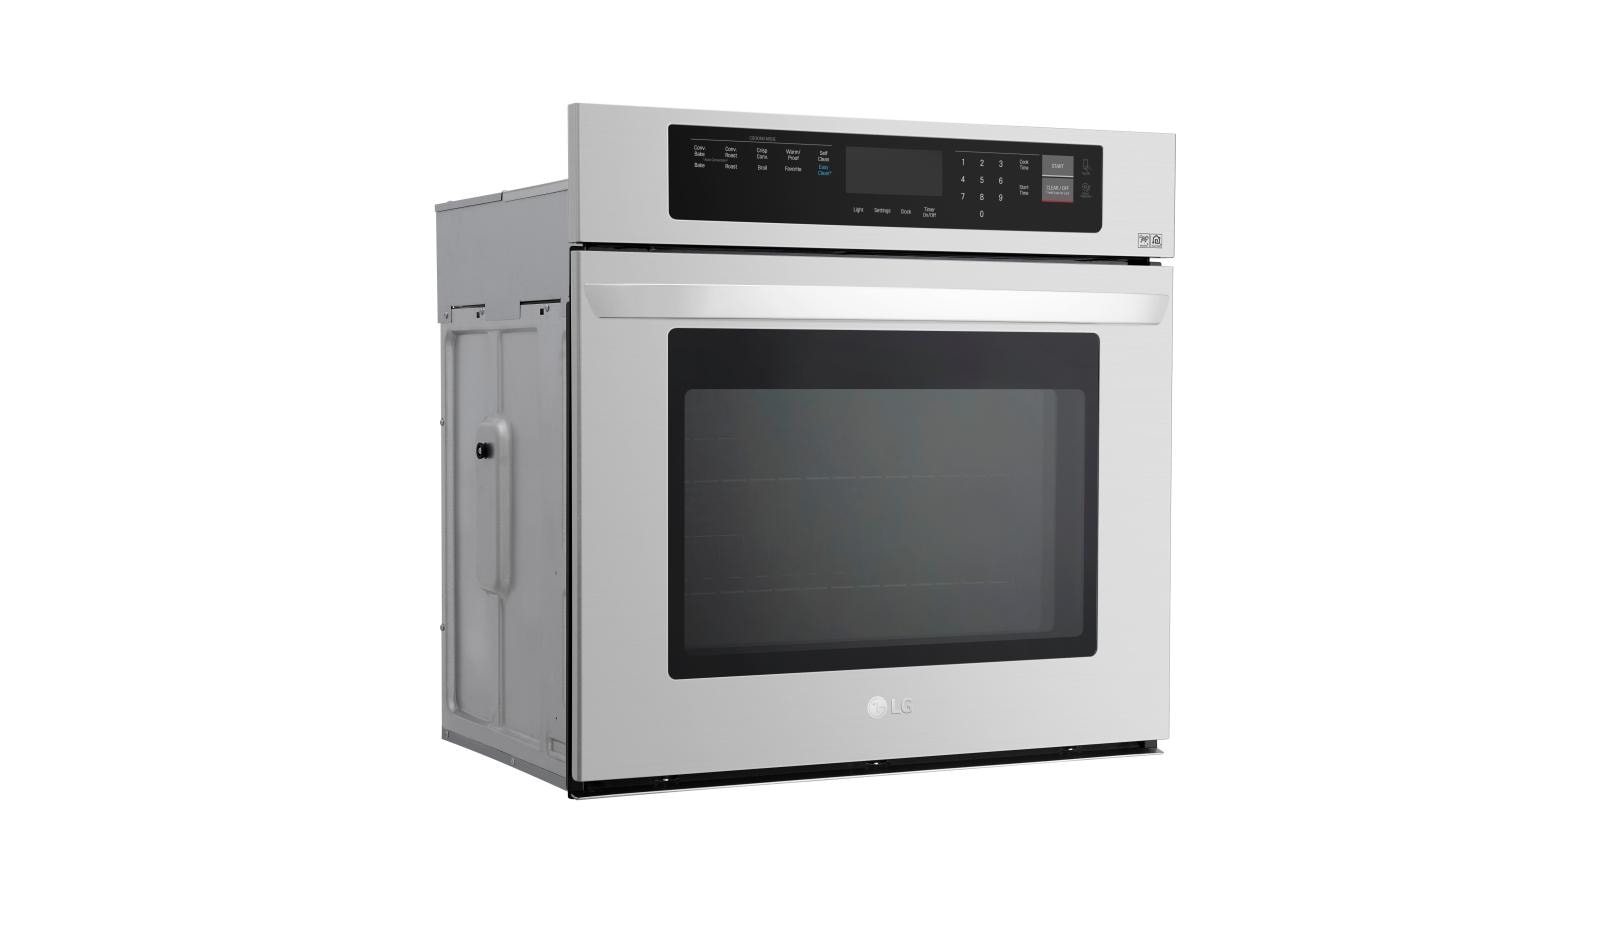 4.7 cu. ft. Single Built-In Wall Oven